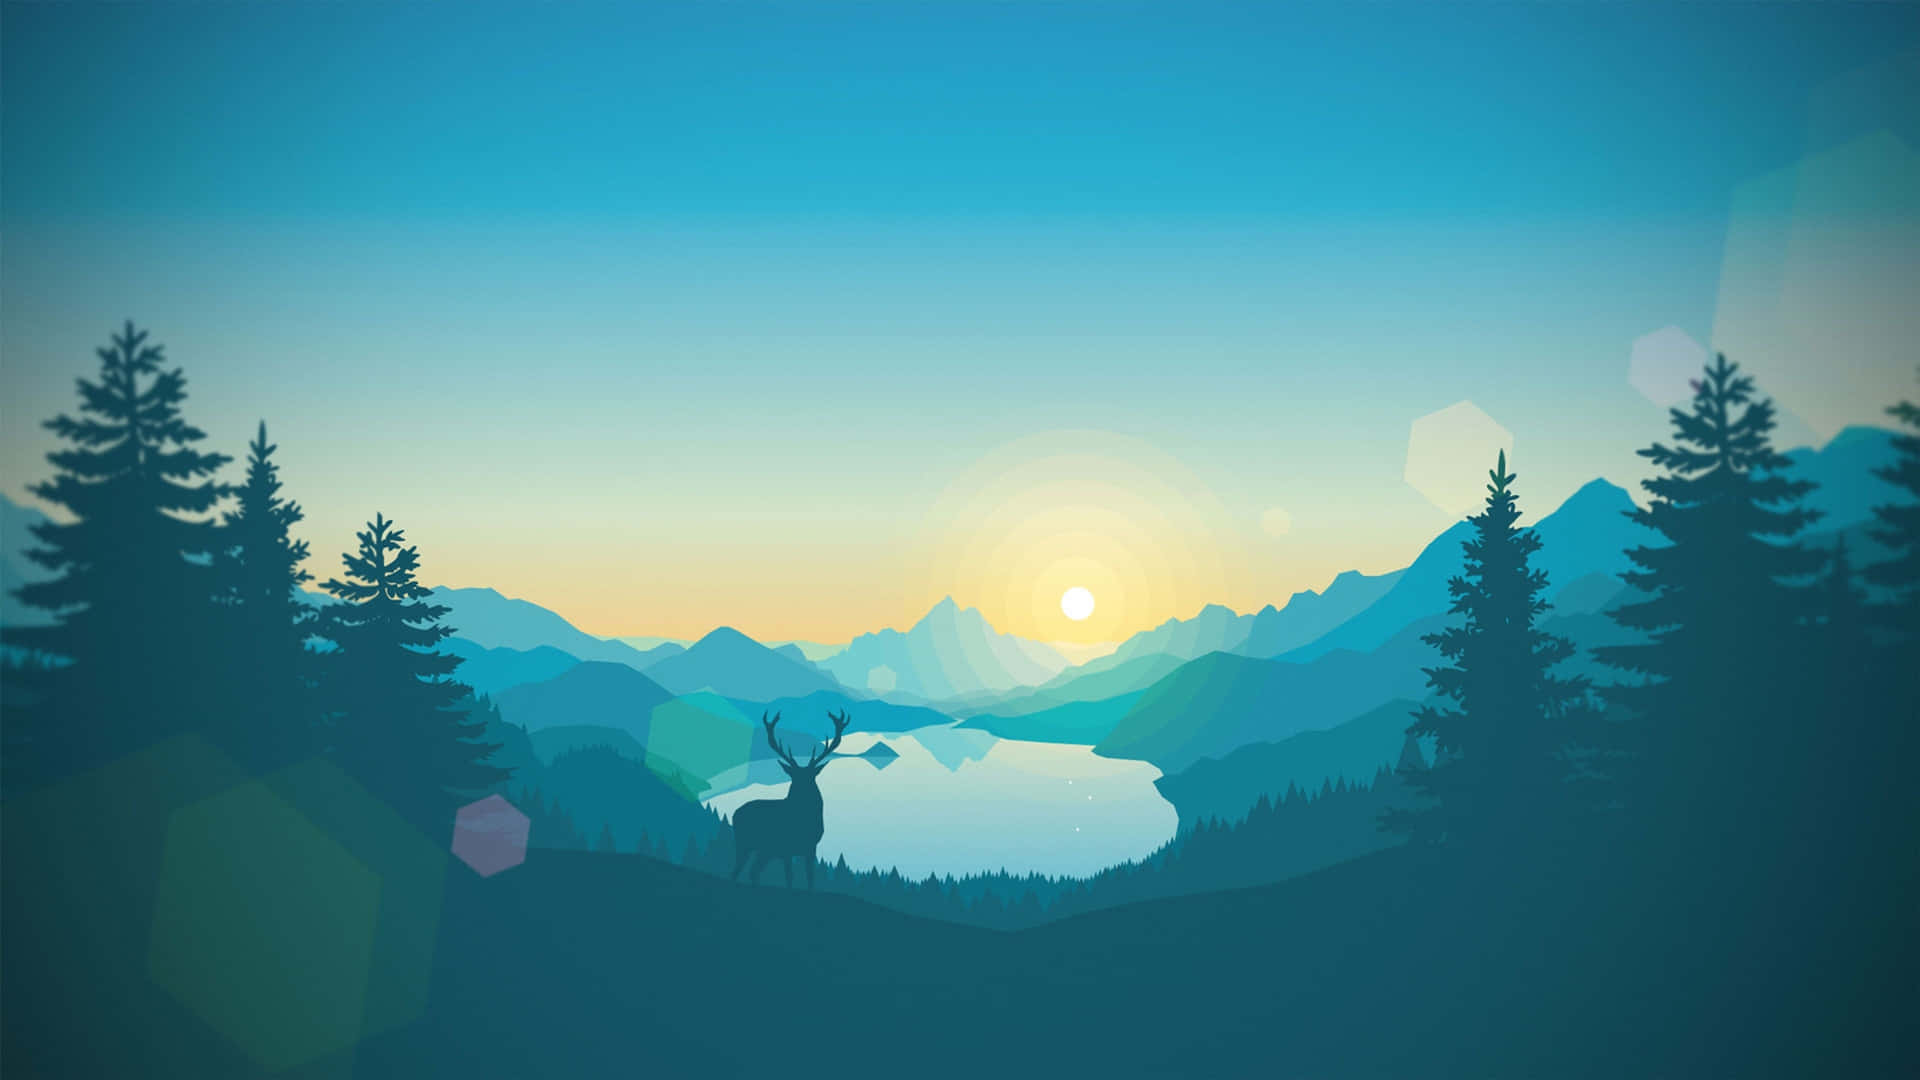 A Deer In The Mountains At Sunset Wallpaper